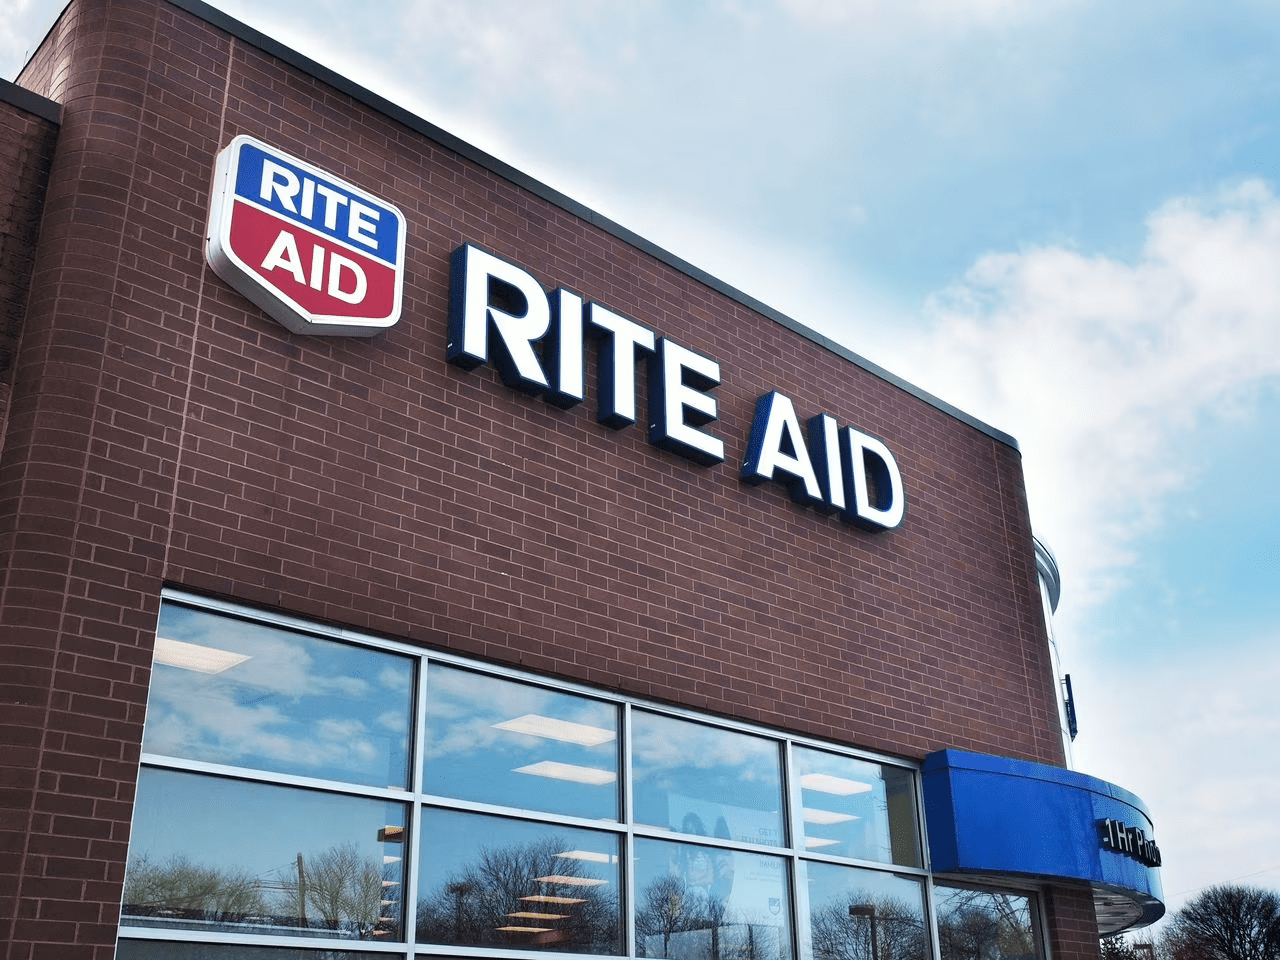 Rite Aid Files for Bankruptcy Amid Slowing Sales, Opioid Litigation